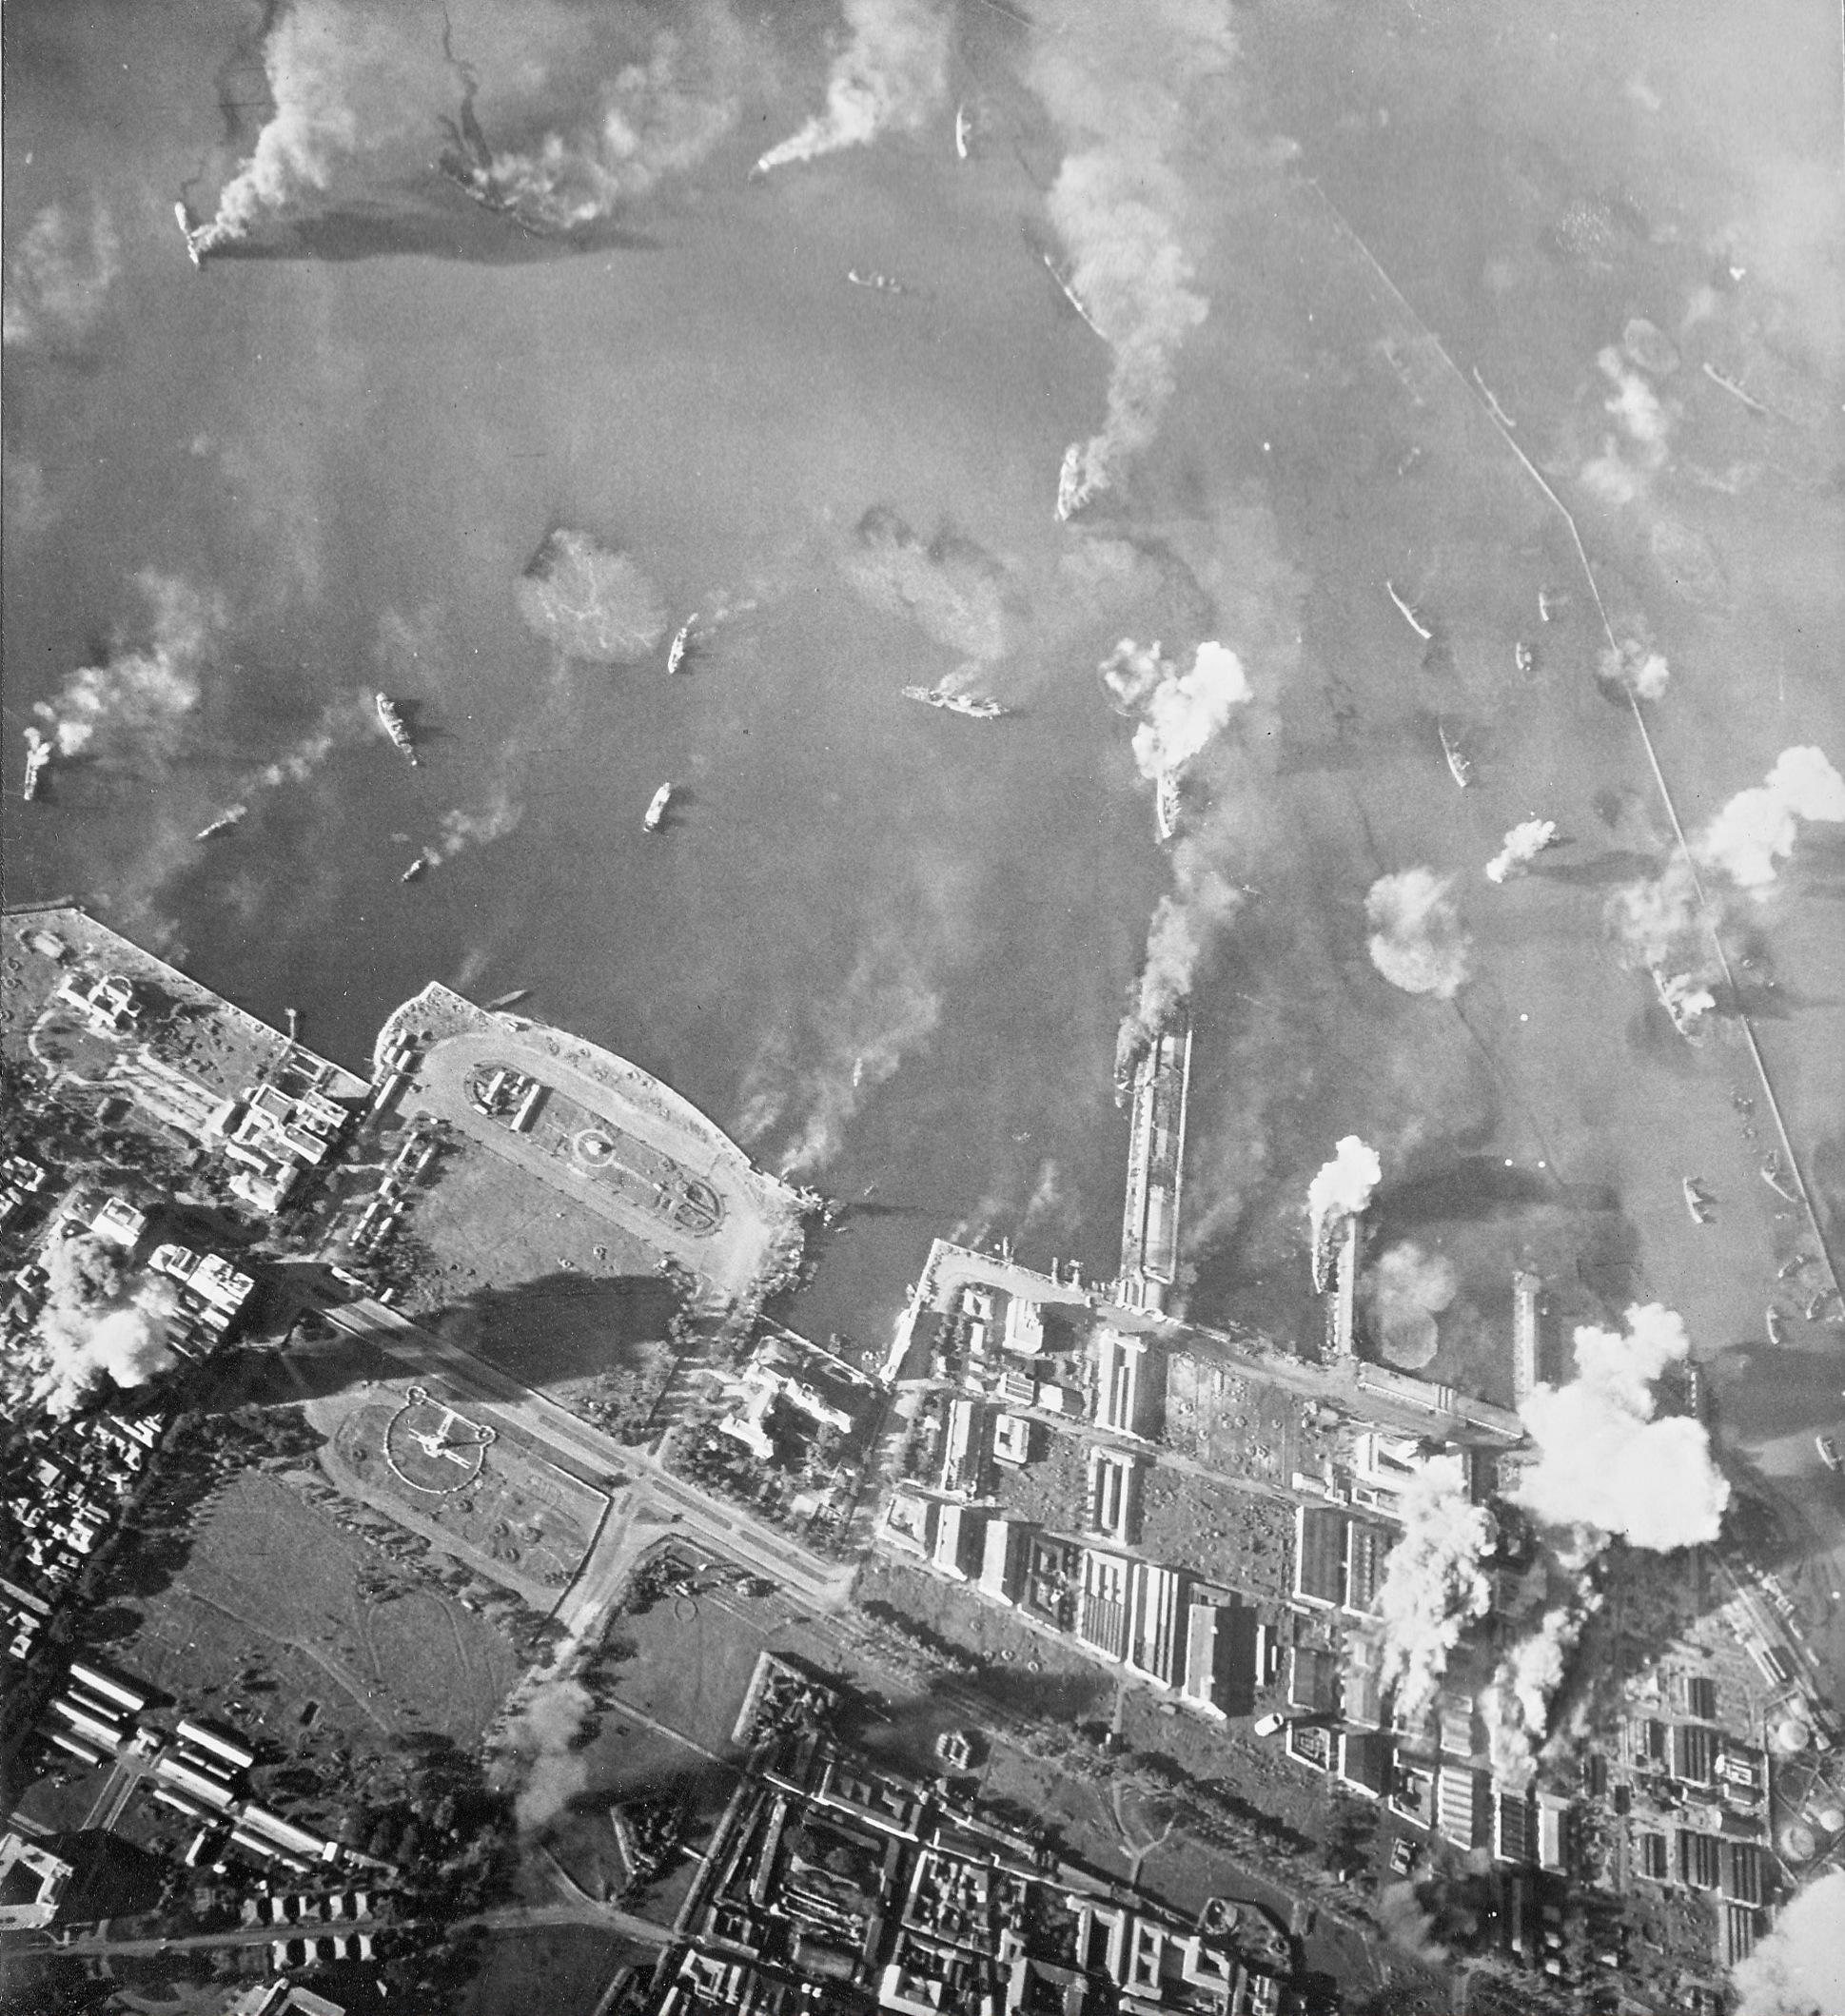 Strike photo of the Manila docks at the height of the attack, 14 Nov 1944, Manila, Luzon, Philippines. Photo taken by aircraft from USS Essex.